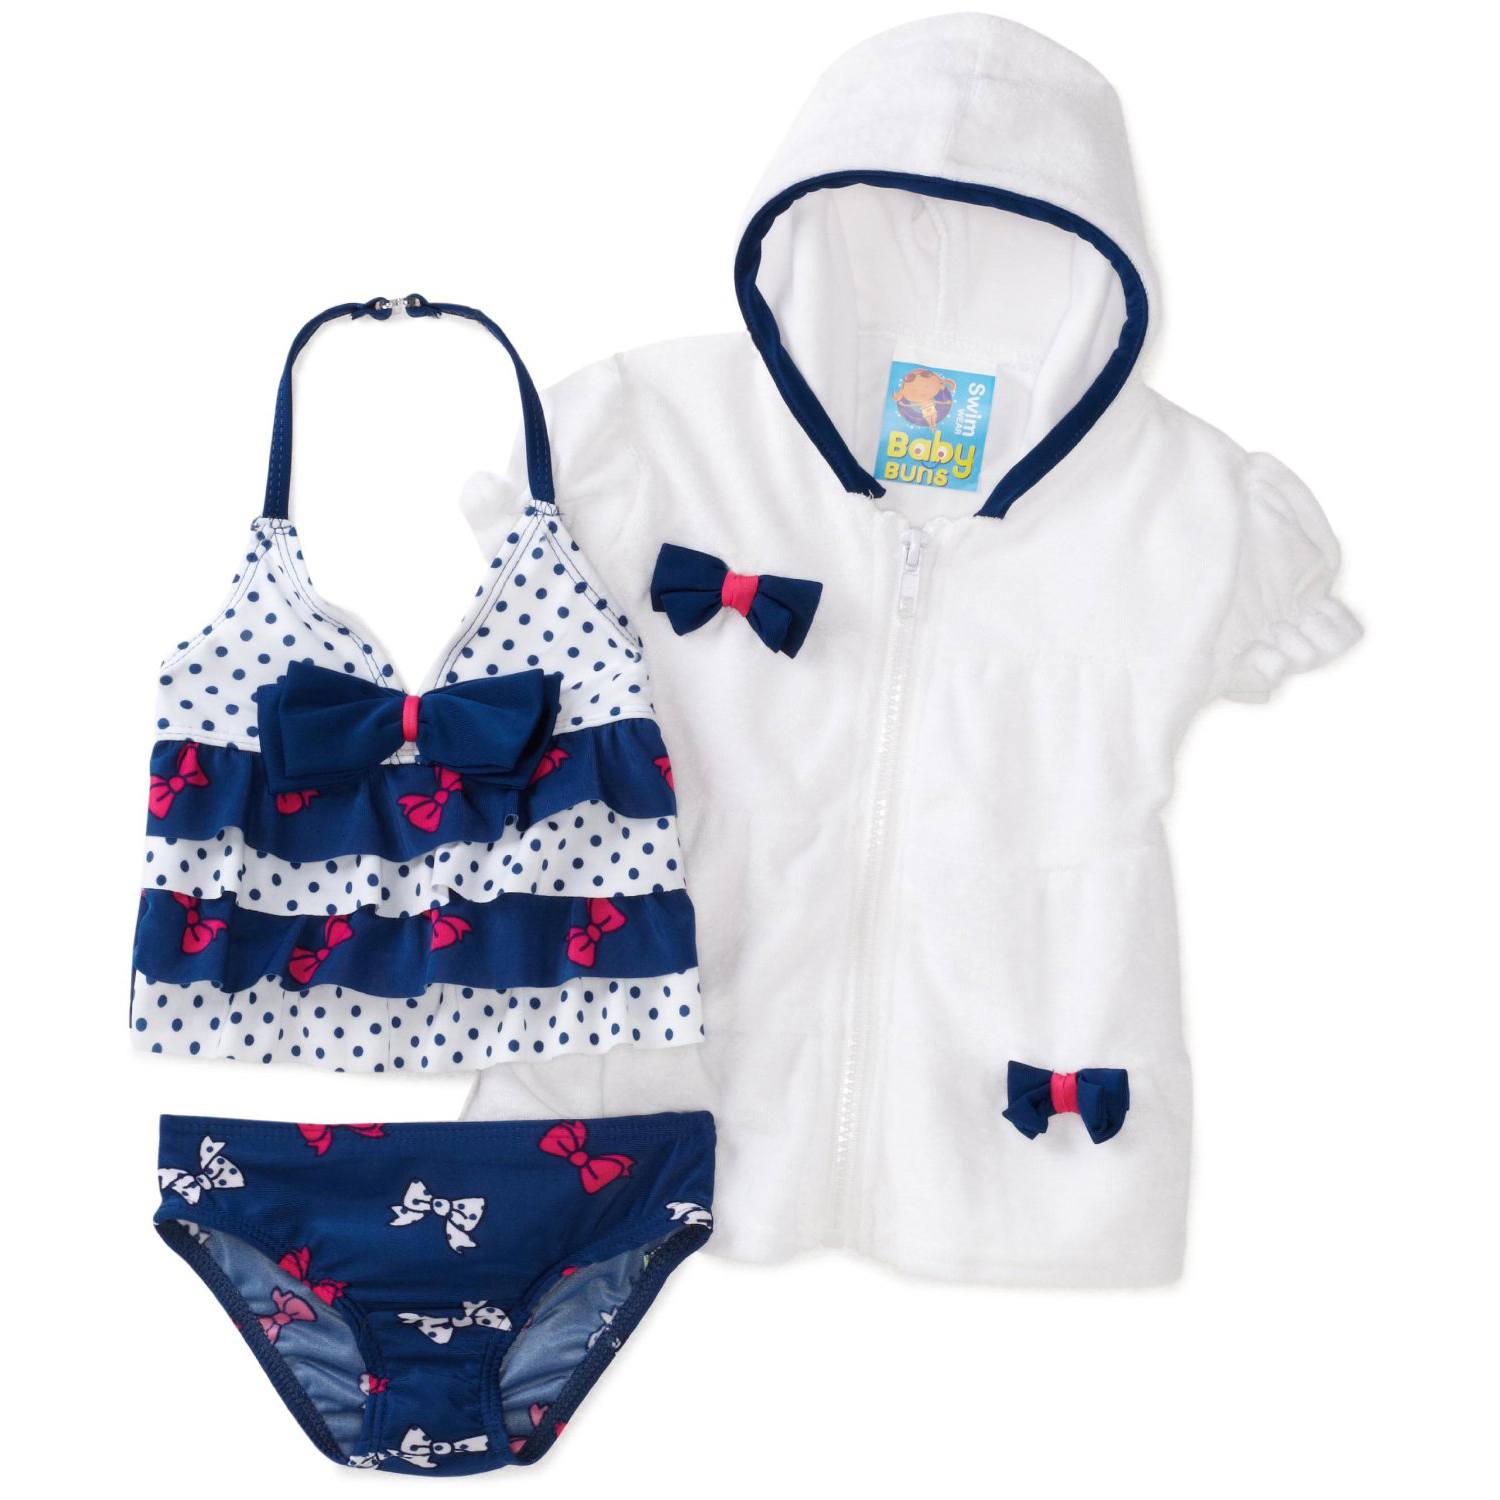 Baby Bunz Girls Infant Baby Bows Swimsuit With Terry Cover-Up  $17.99 